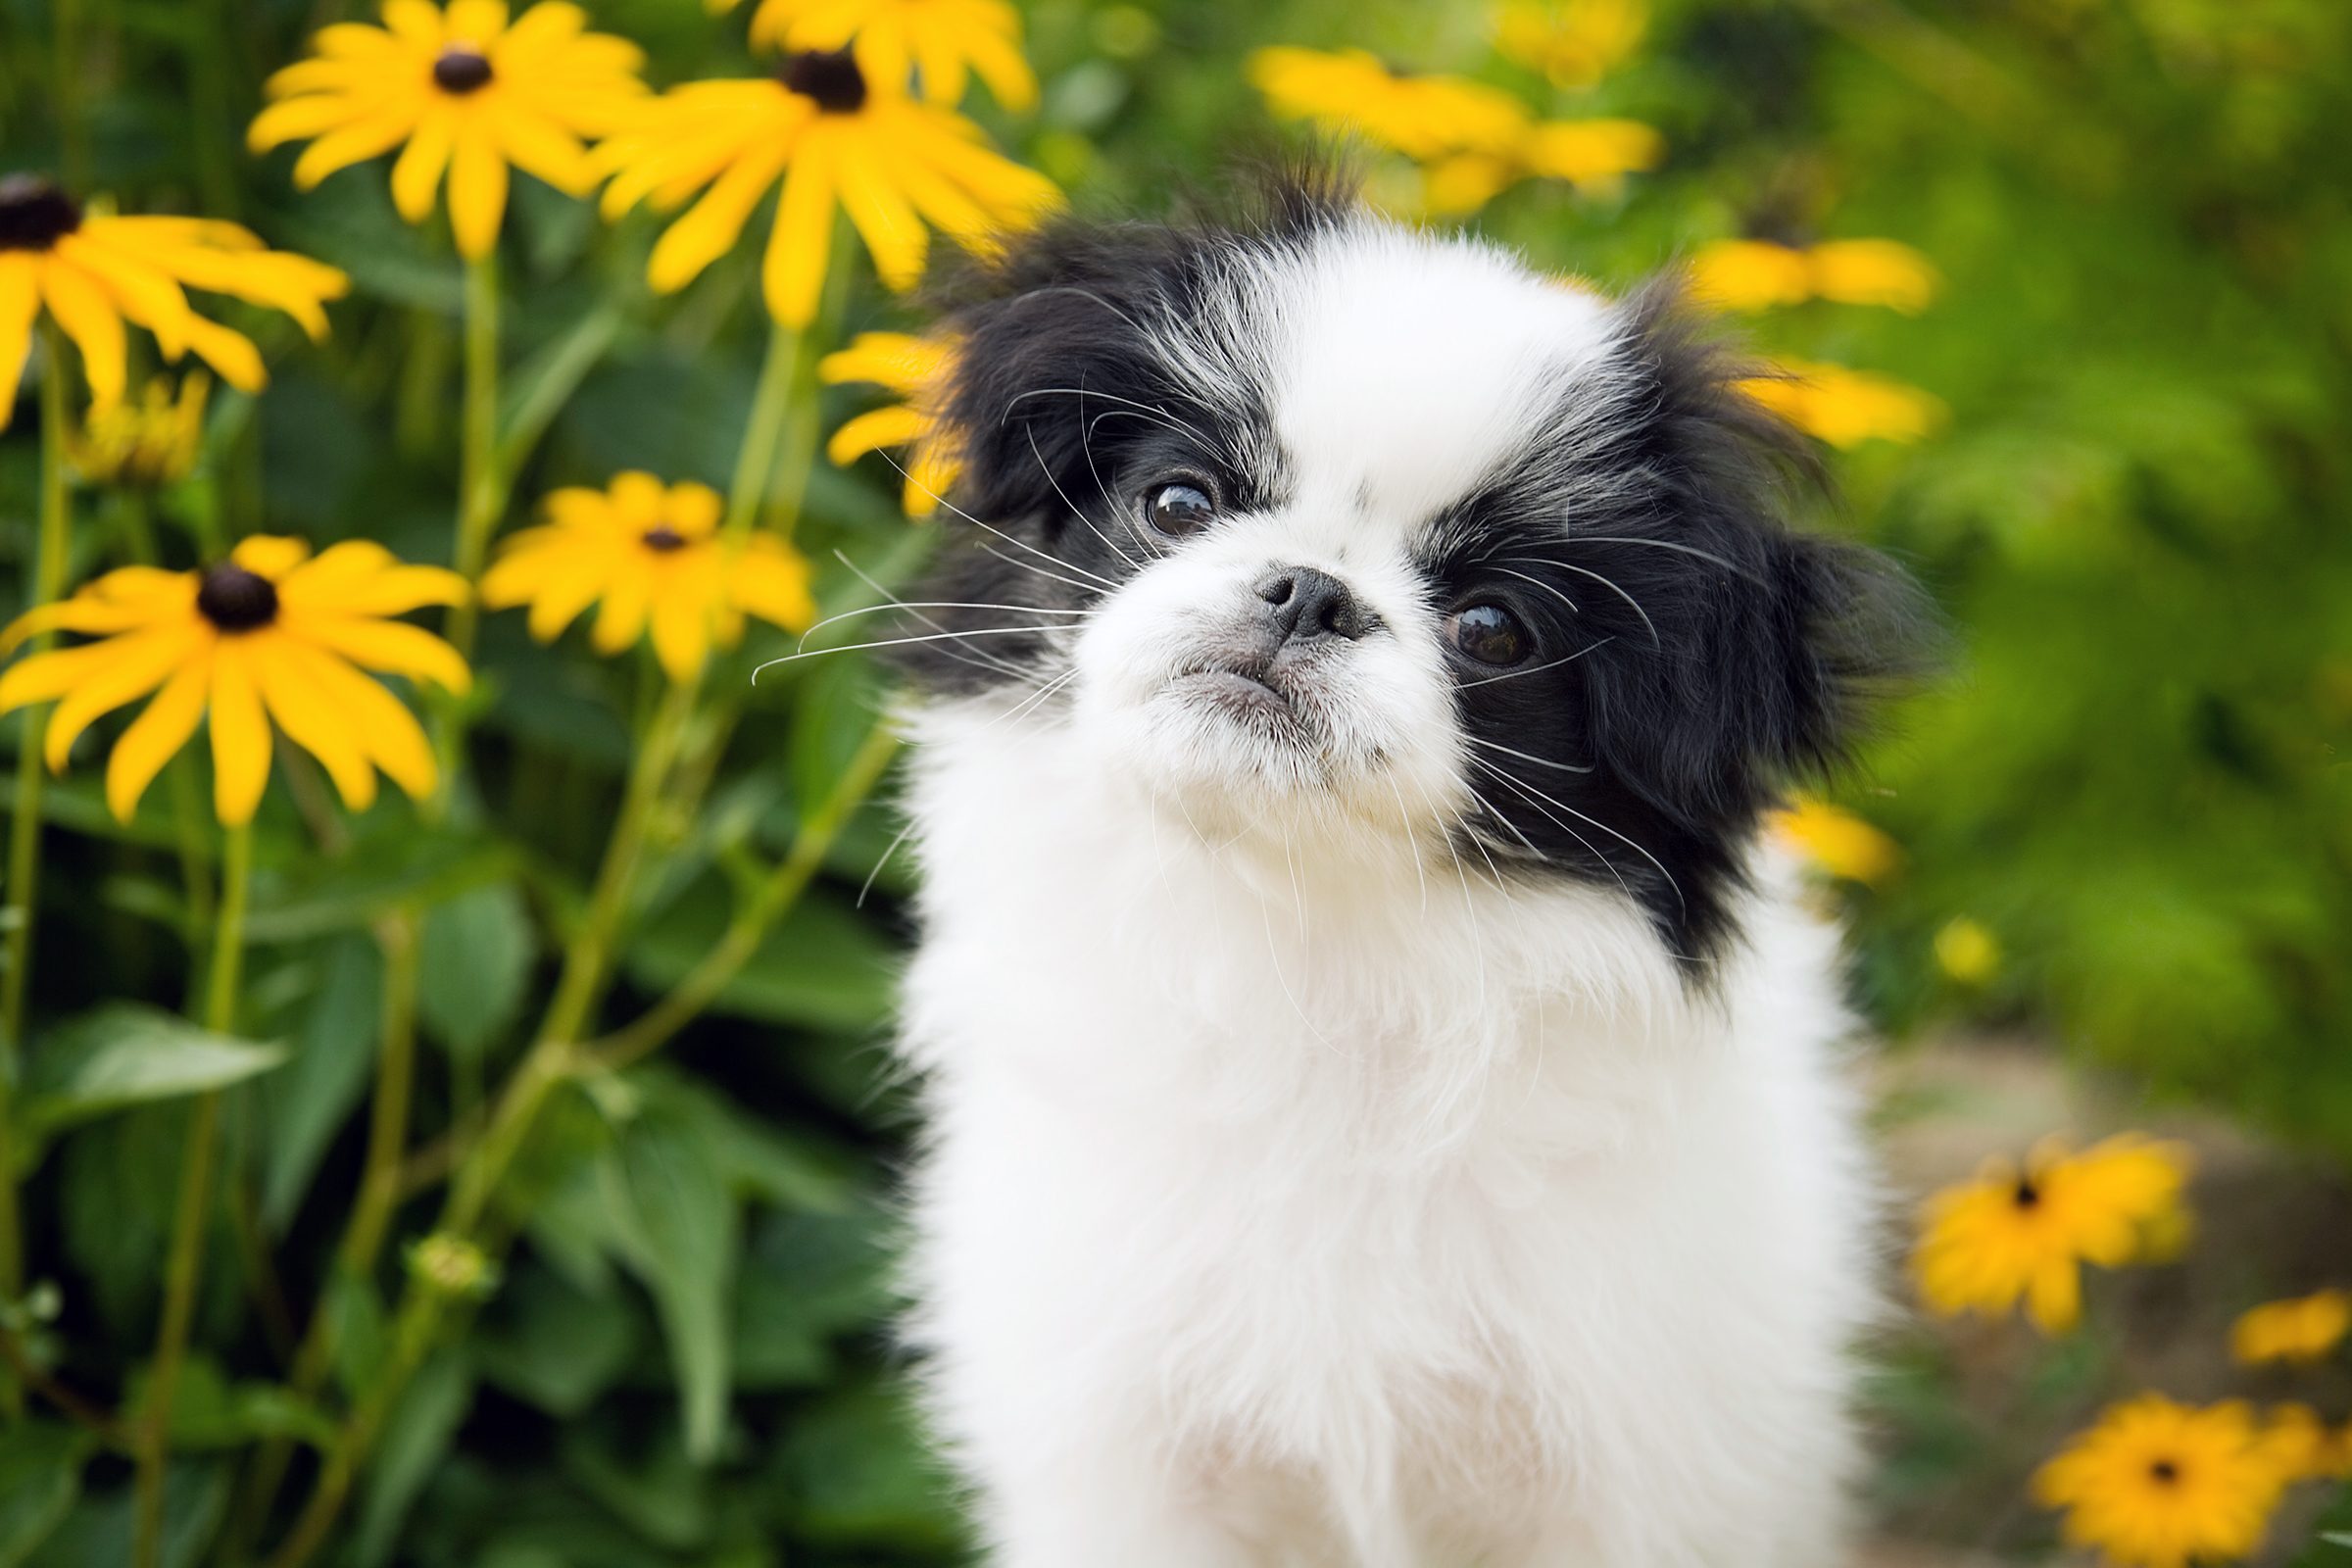 Photo of a Japanese Chin puppy sitting in a flower garden, looking at the camera with her head cocked to one side